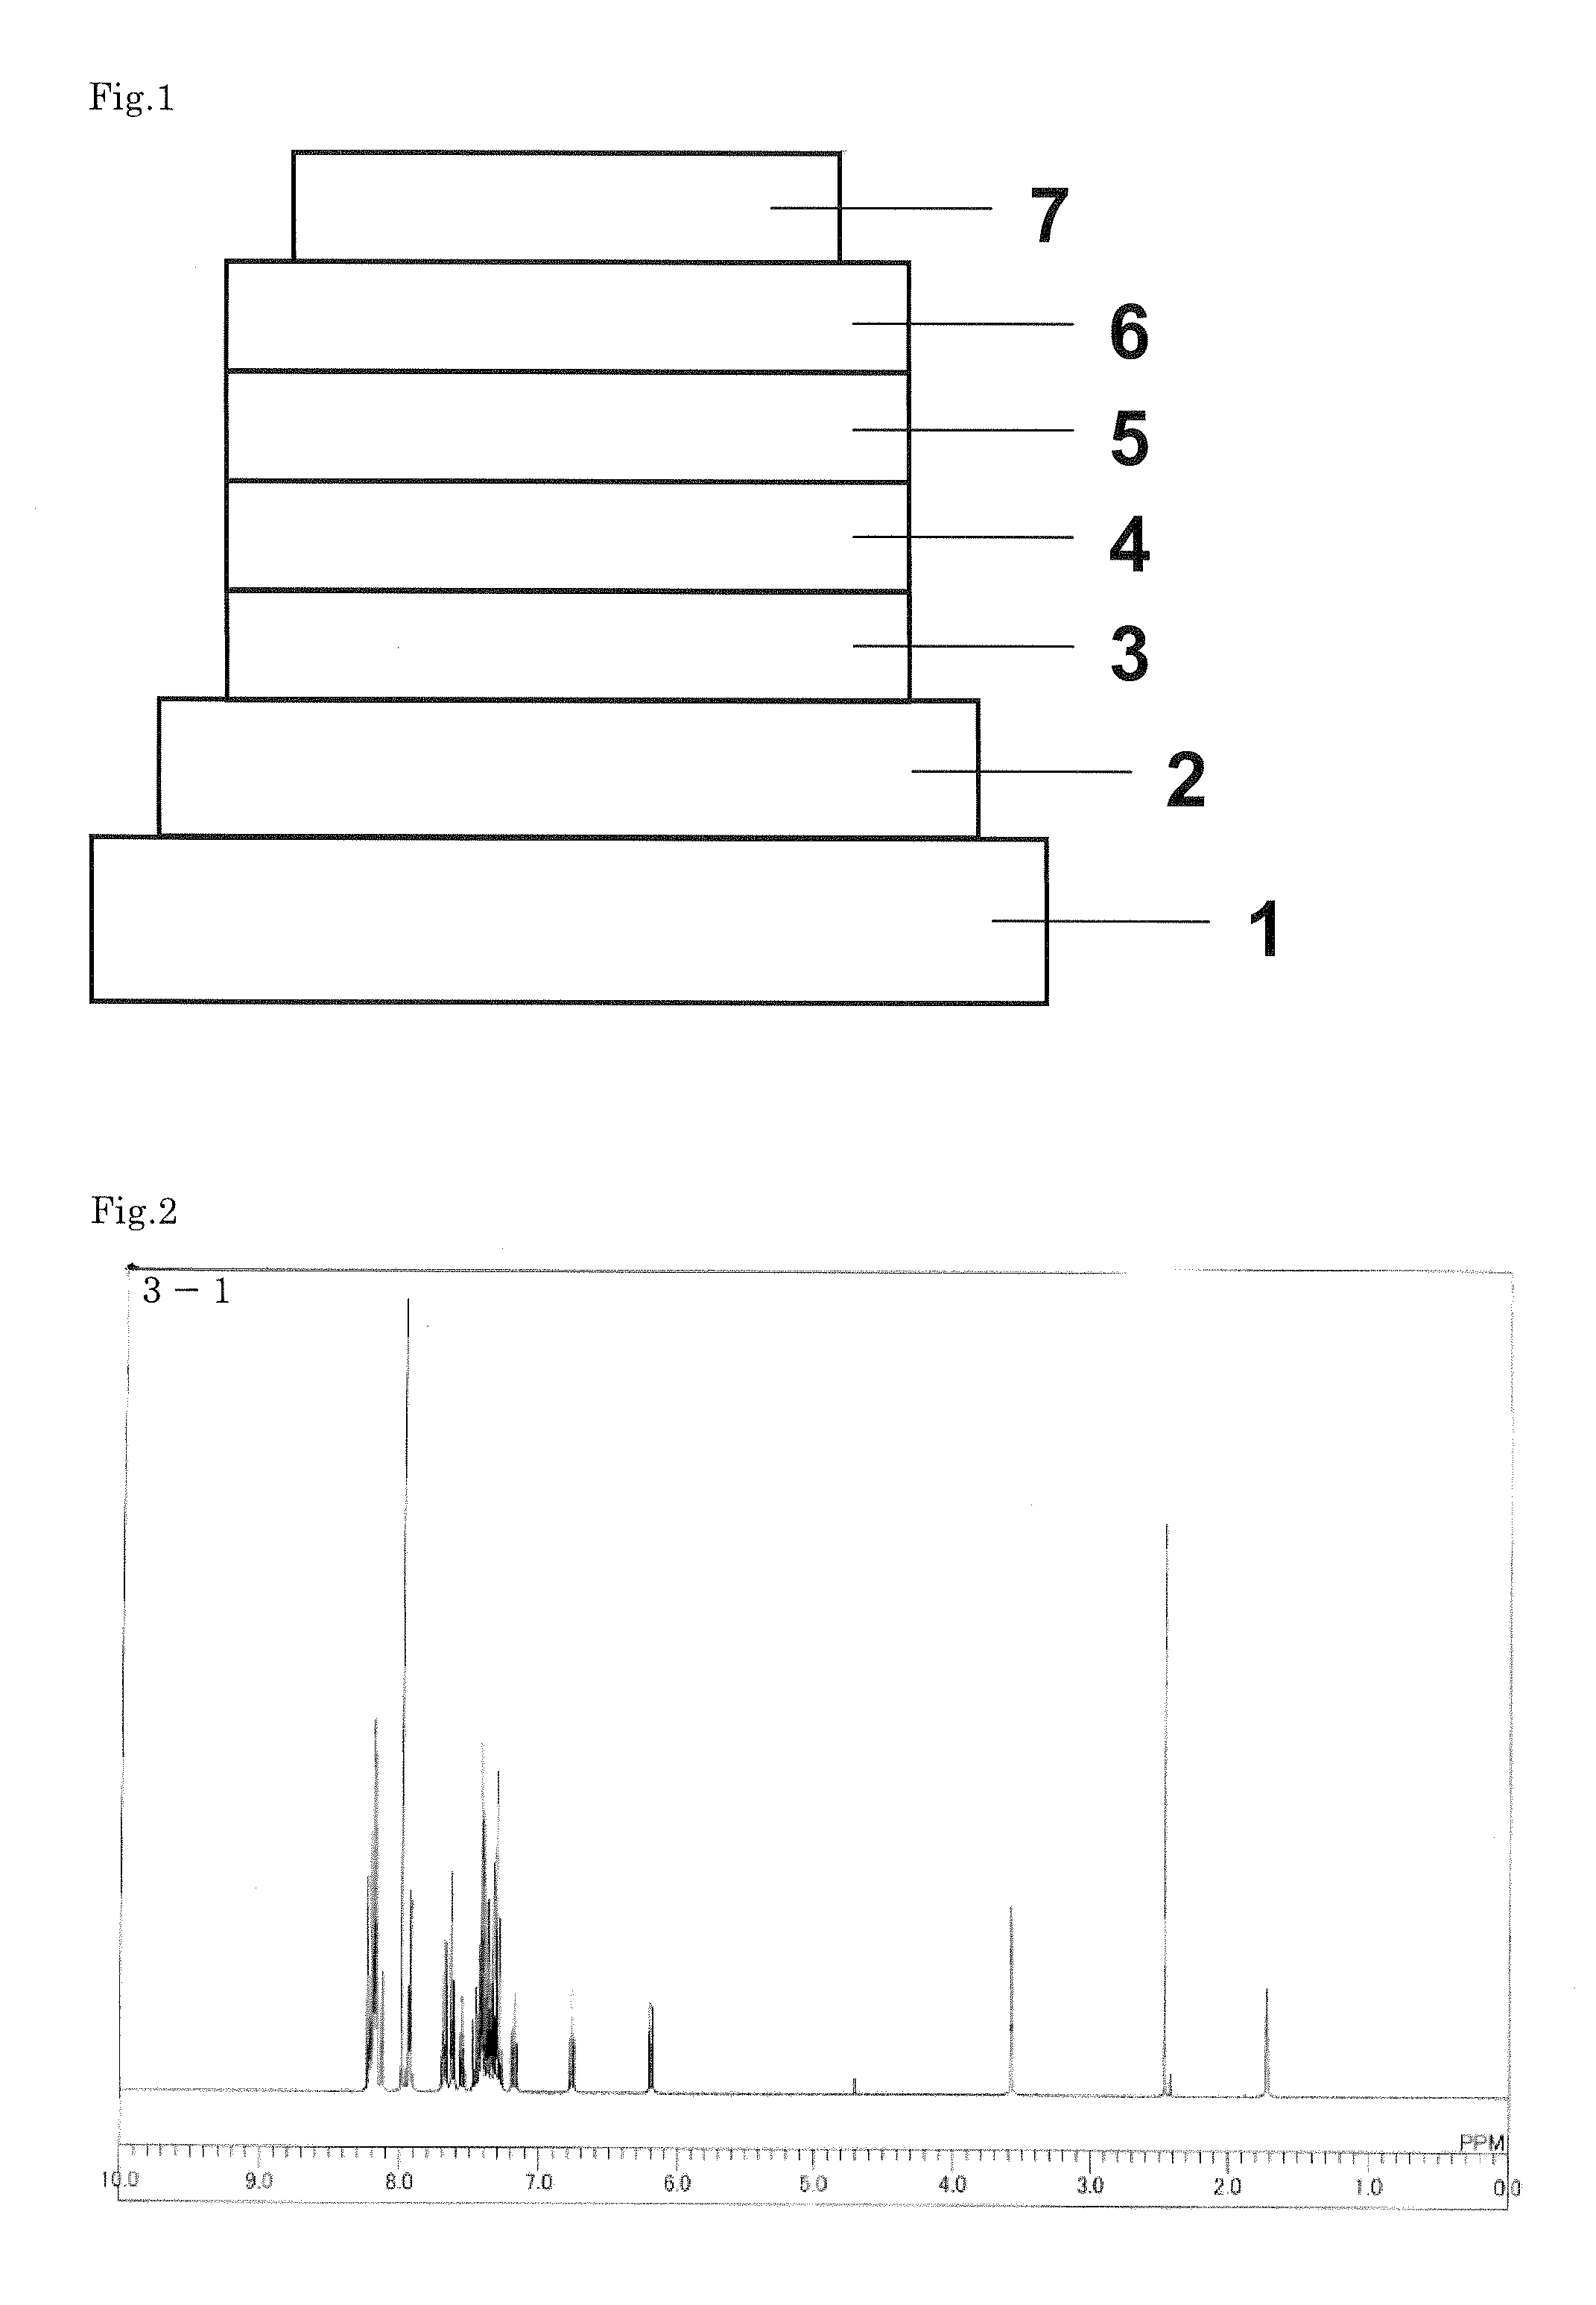 Organic electroluminescent device comprising an organic layer containing an indolocarbazole compound